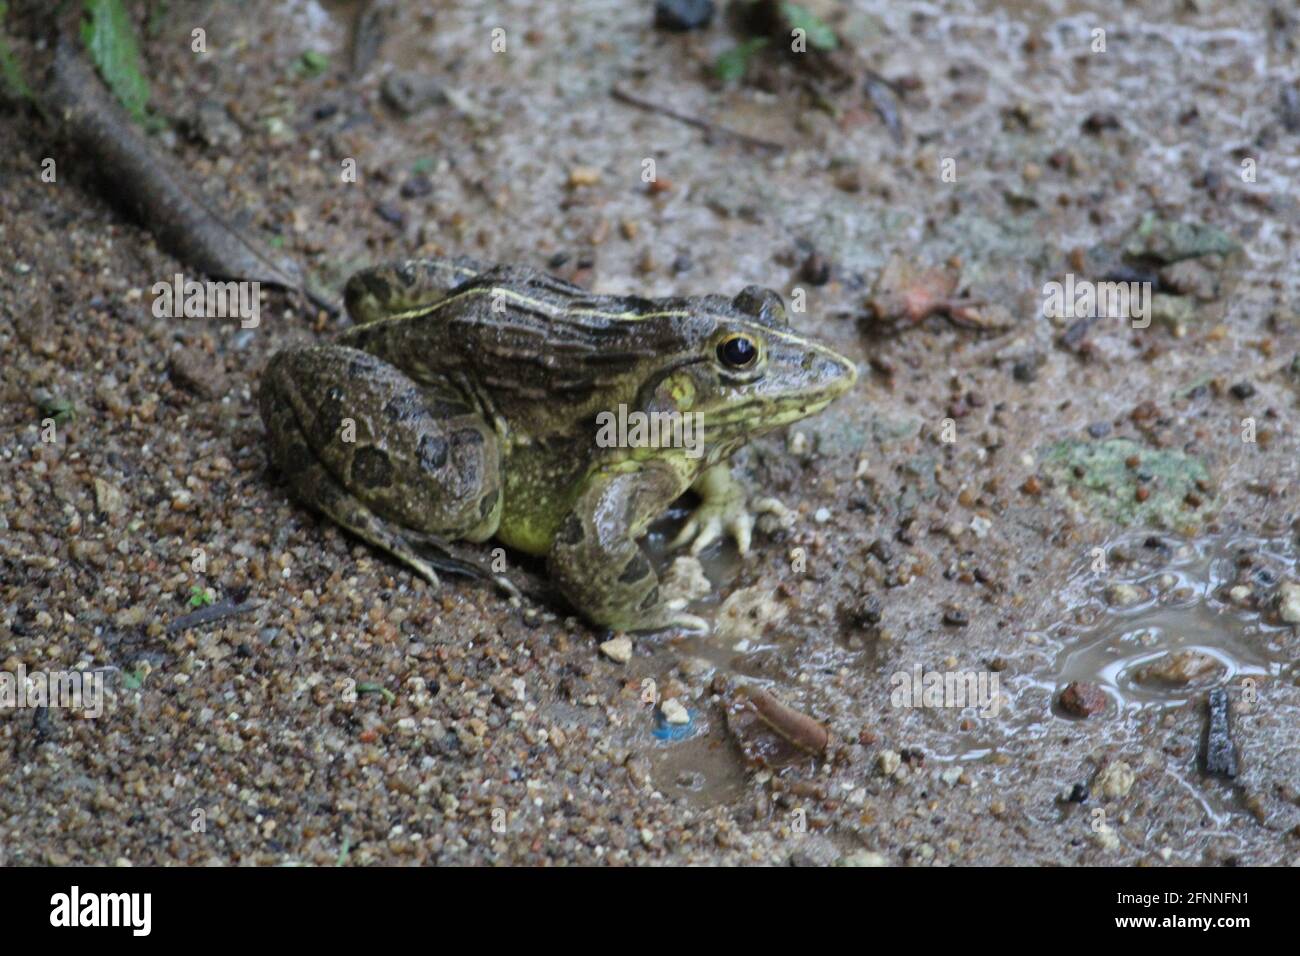 Closeup shot of a Marsh frog on the wet forest ground Stock Photo